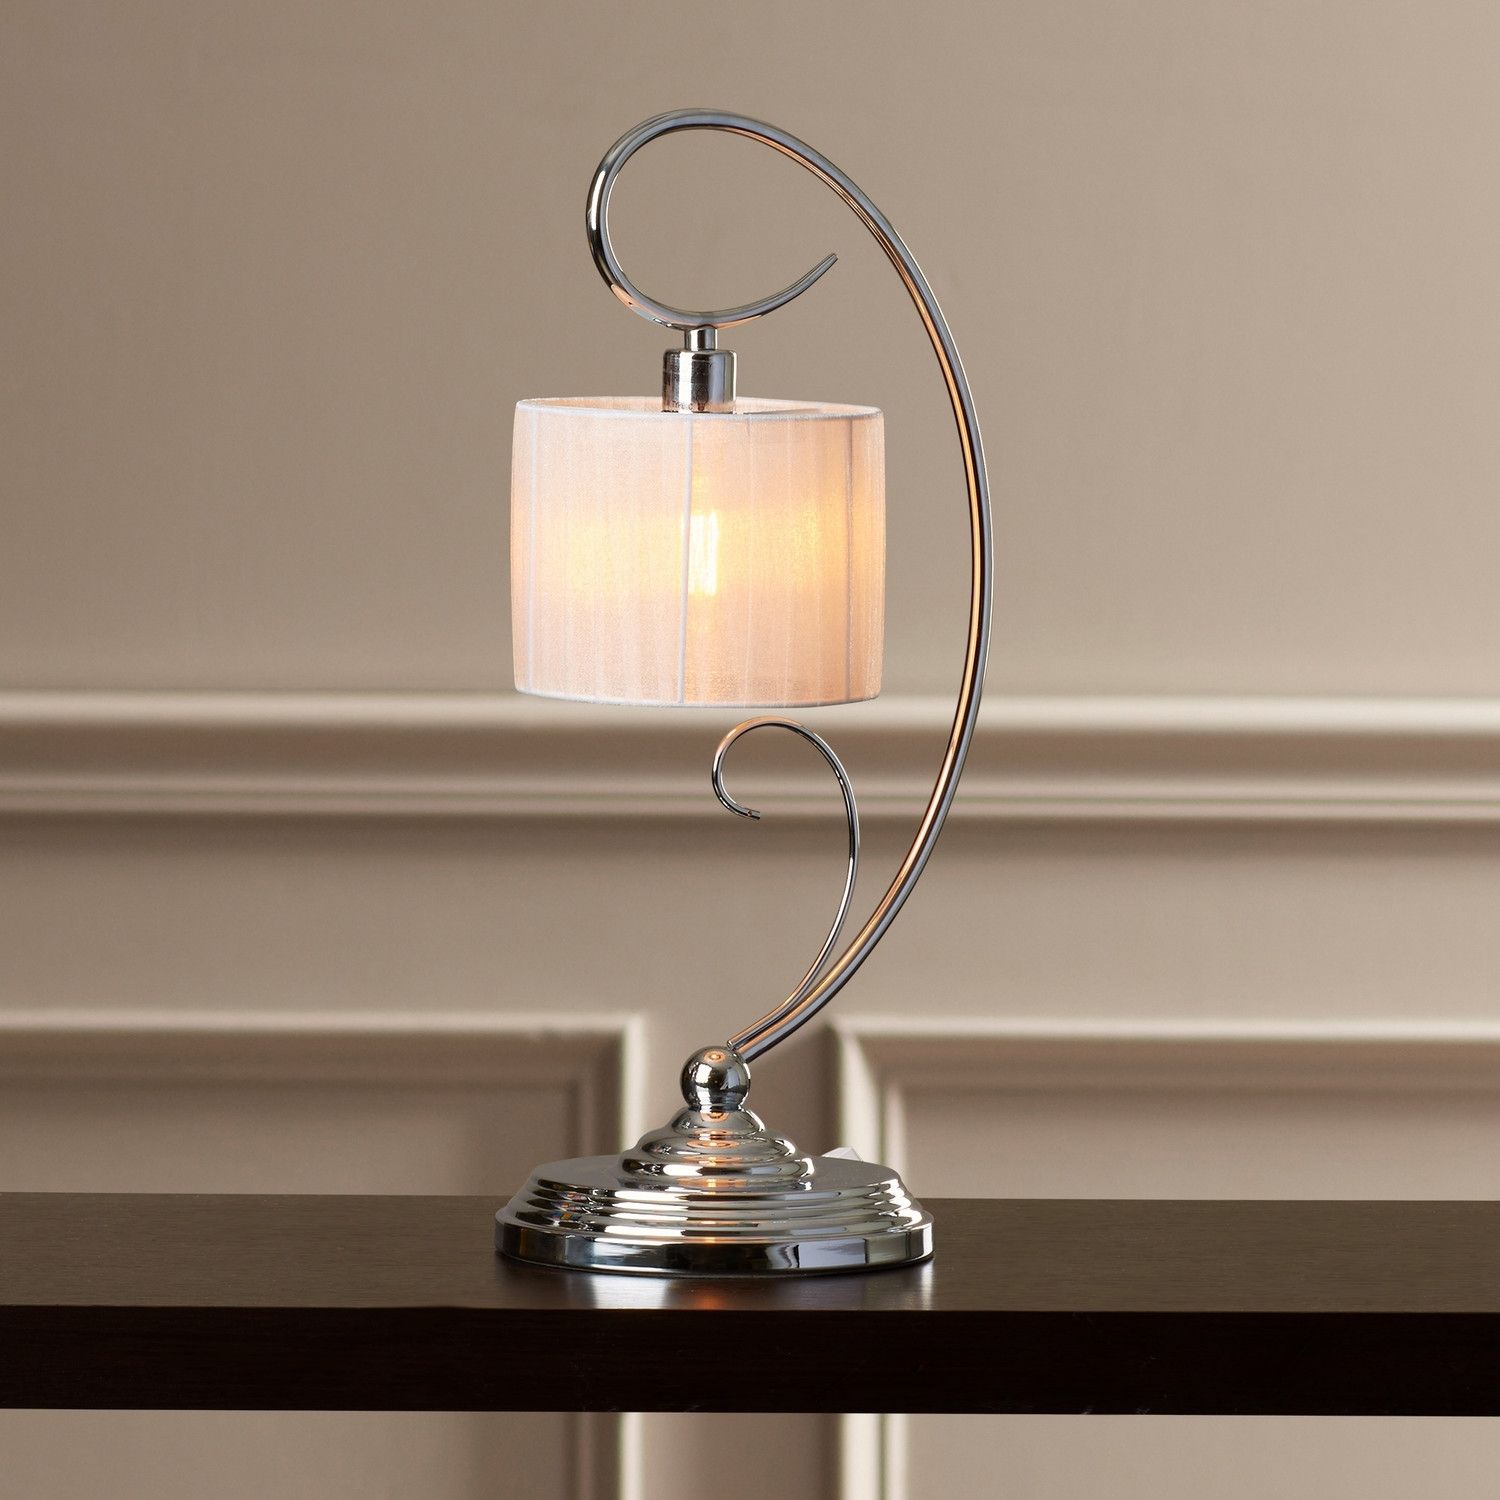 Lamp : Metal Lamp Shades For Table Lamps Inspirational New In Throughout Living Room Table Top Lamps (View 2 of 15)